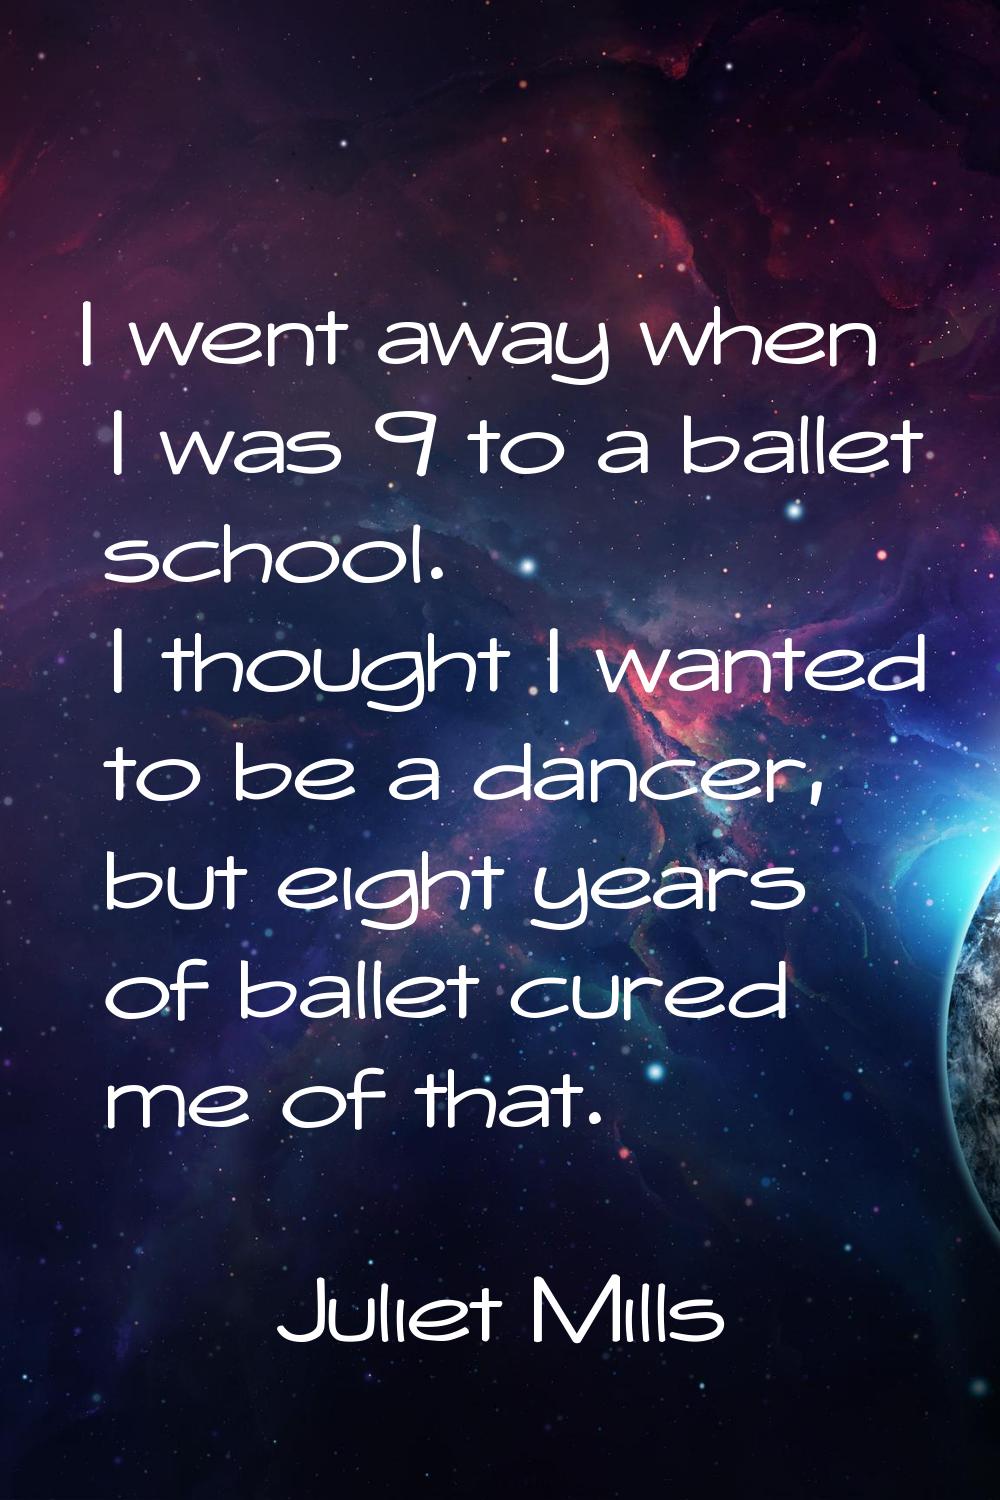 I went away when I was 9 to a ballet school. I thought I wanted to be a dancer, but eight years of 